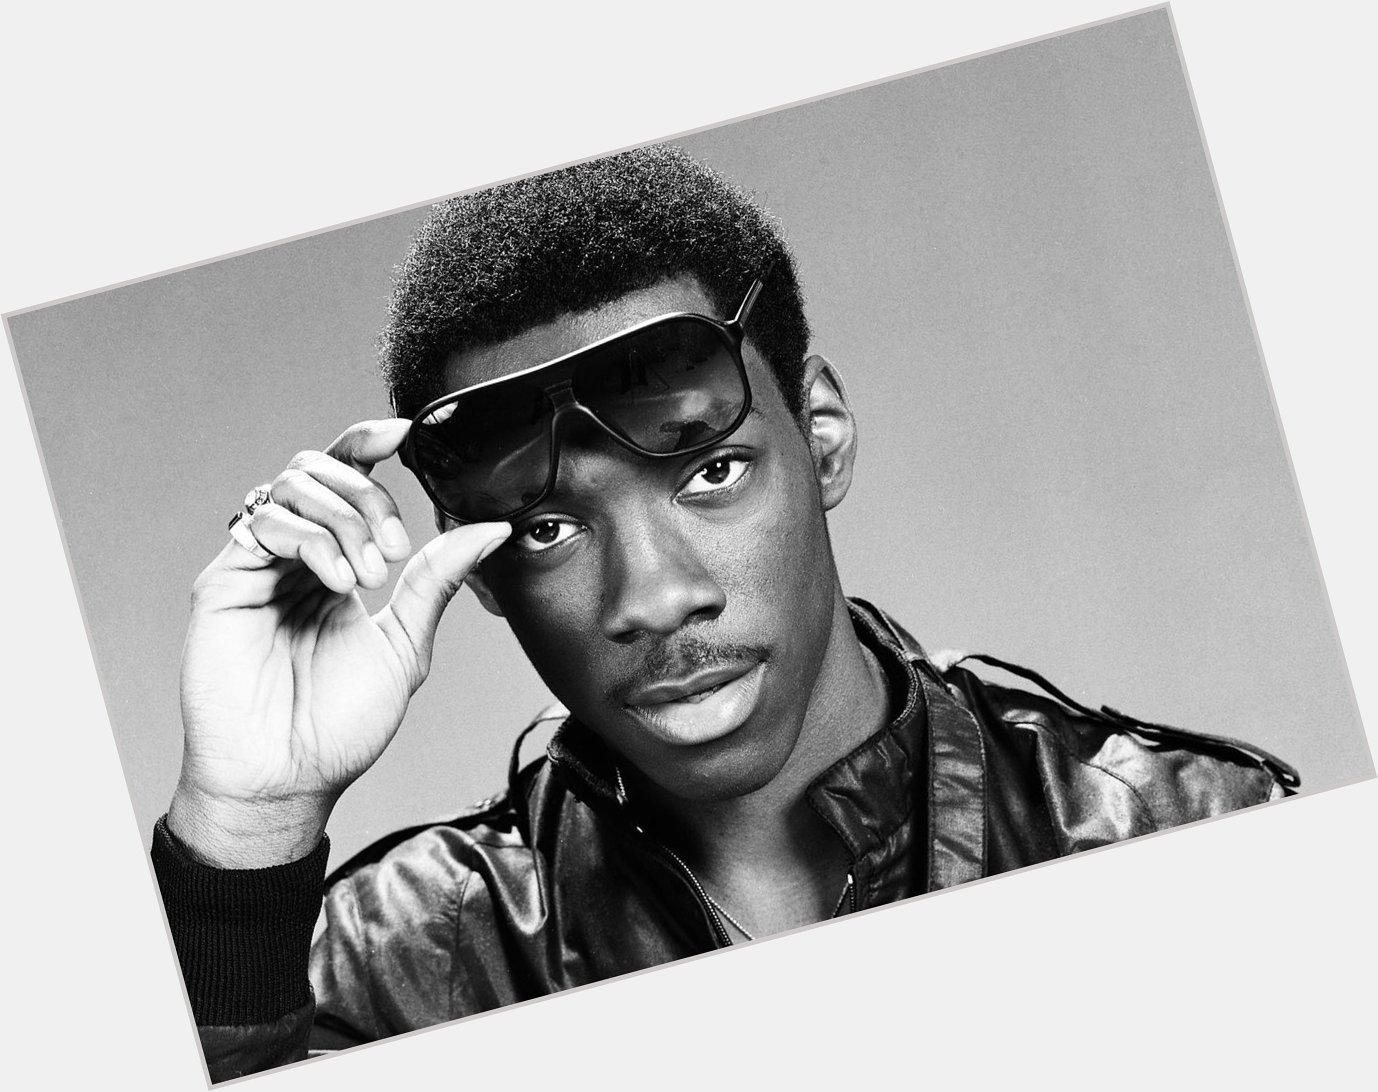 Happy Birthday to Eddie Murphy who won\t fall for the banana in the tailpipe, especially on his birthday. 